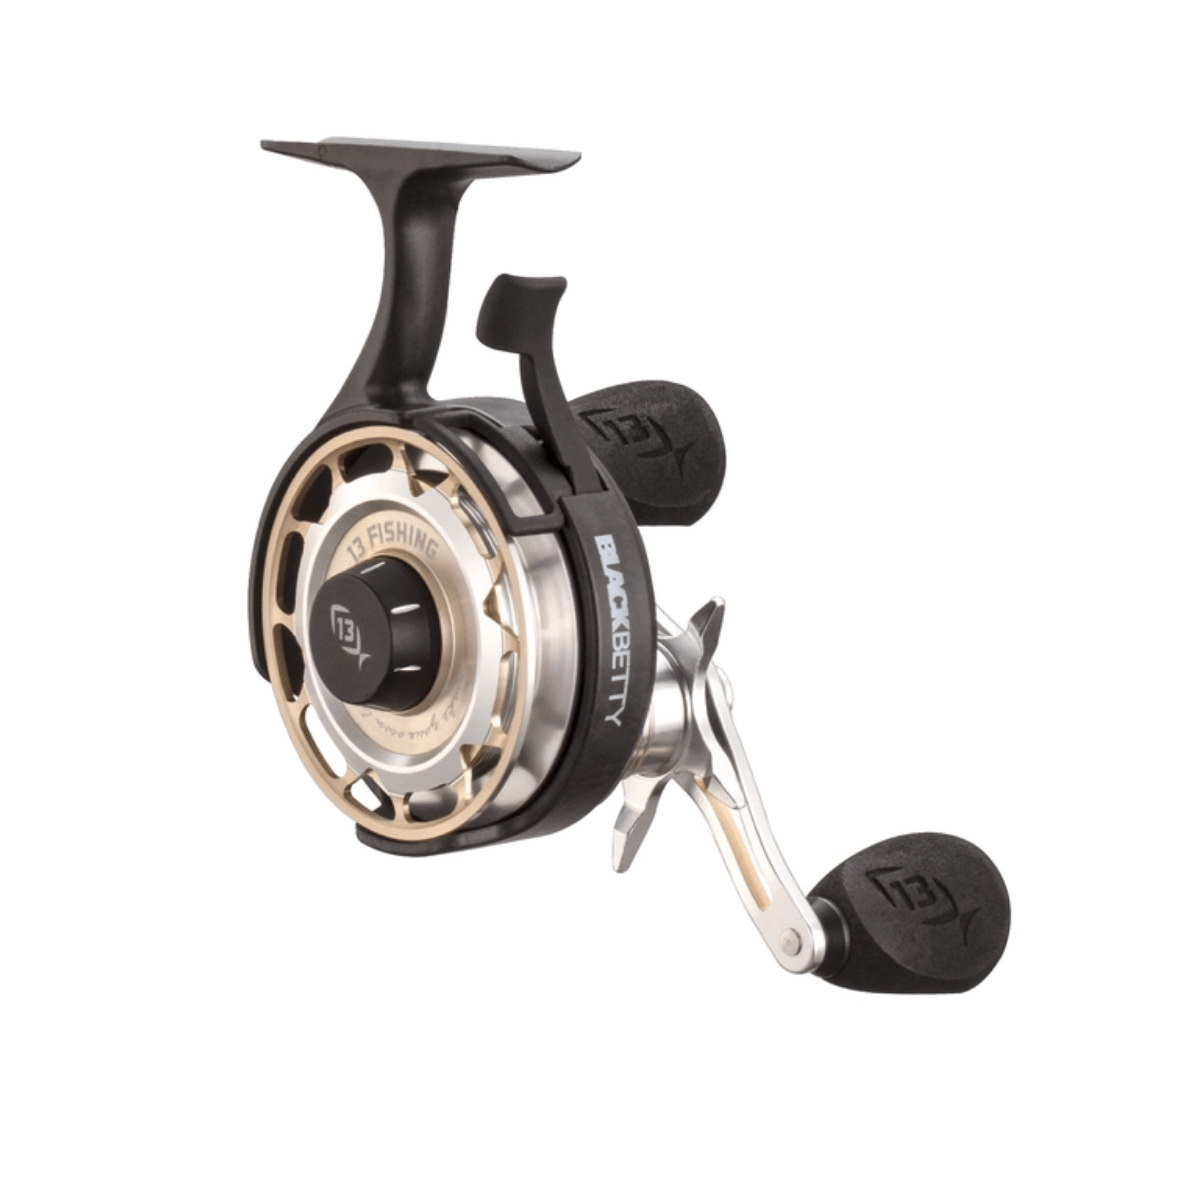 https://images.franksgreatoutdoors.com/media/catalog/product/cache/9dd51bfda36af56f57631c5d8cce9324/1/3/13_fishing_freefall_carbon_-_inline_ice_fishing_reels.png